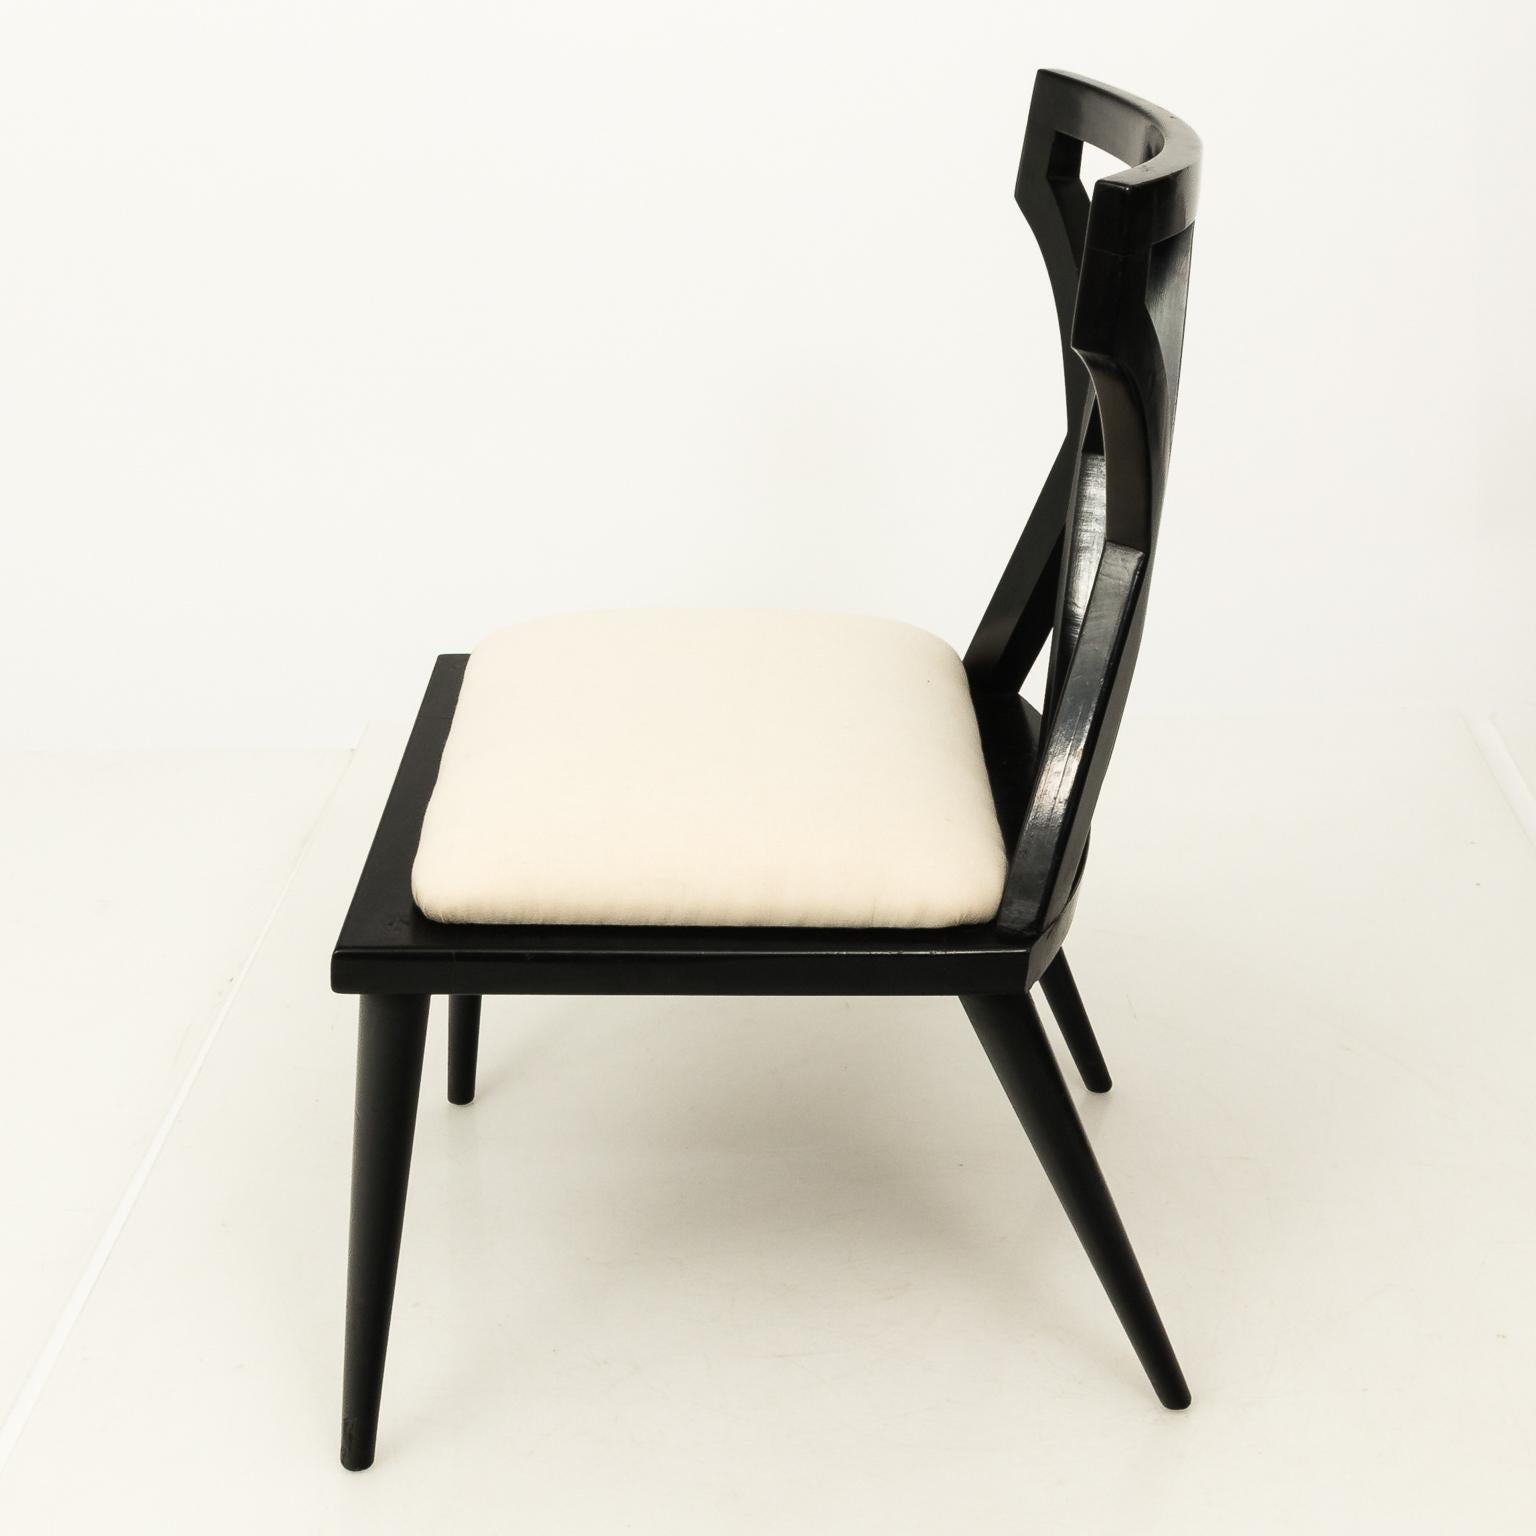 Pair of Mid-Century Modern French black lacquered side chairs, circa 1960s.
 